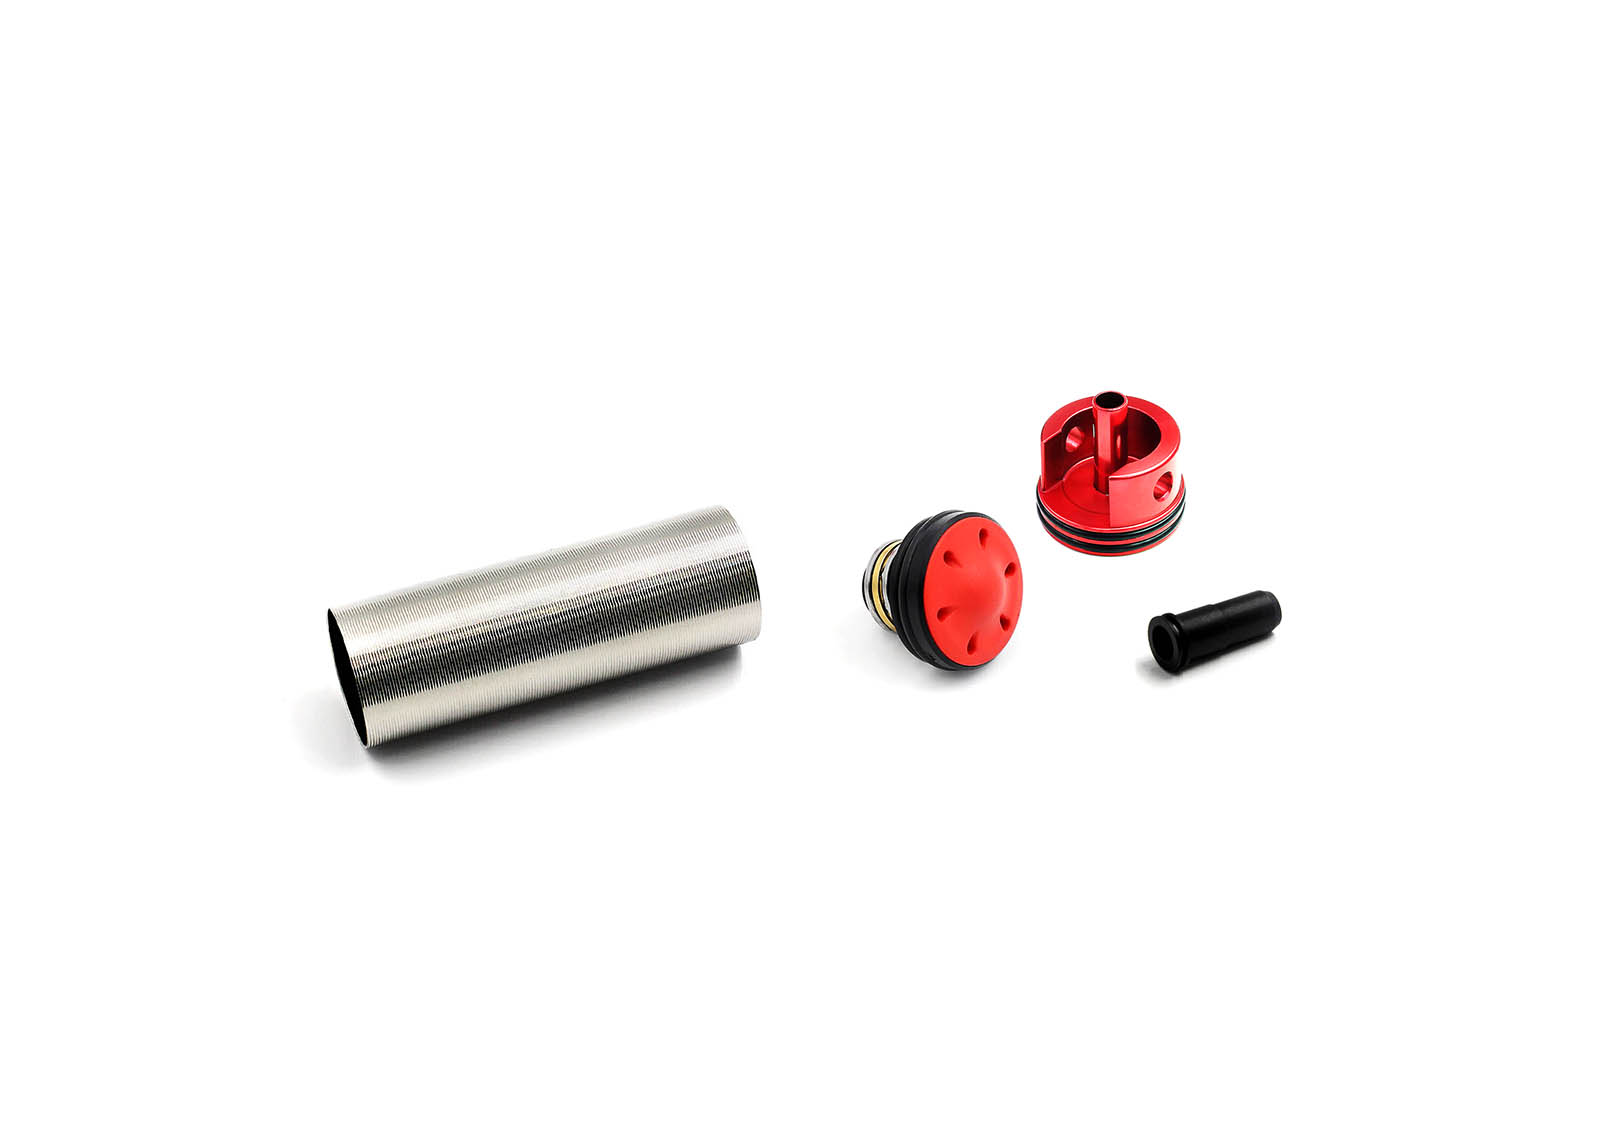 Bore-Up Cylinder Set for M16A2 - Modify AEG Airsoft parts